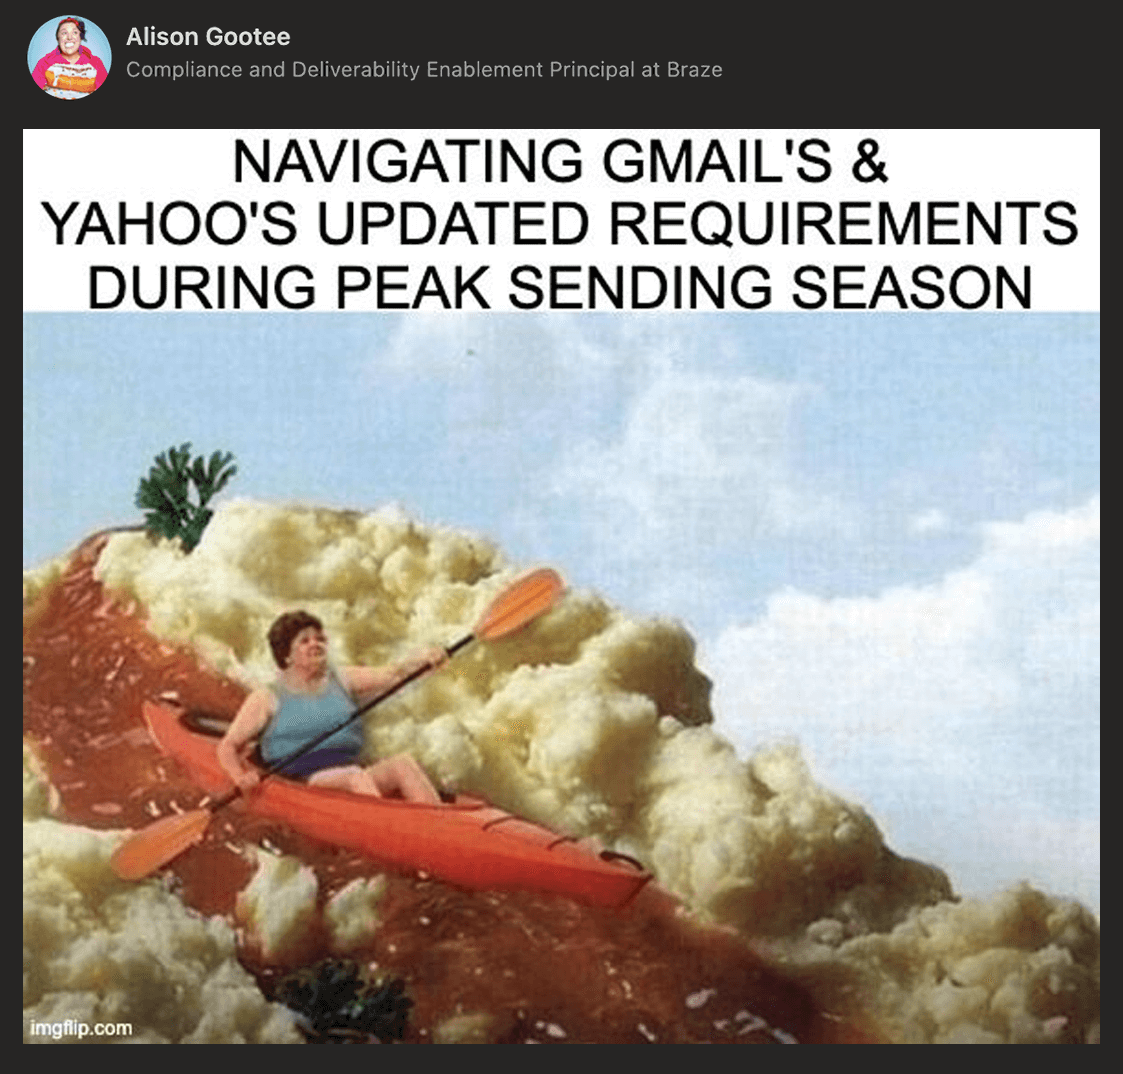 Alison Gootee on LinkedIn with a meme that says 'Navigating Gmail's & Yahoo's updated requirements during peak sending season'